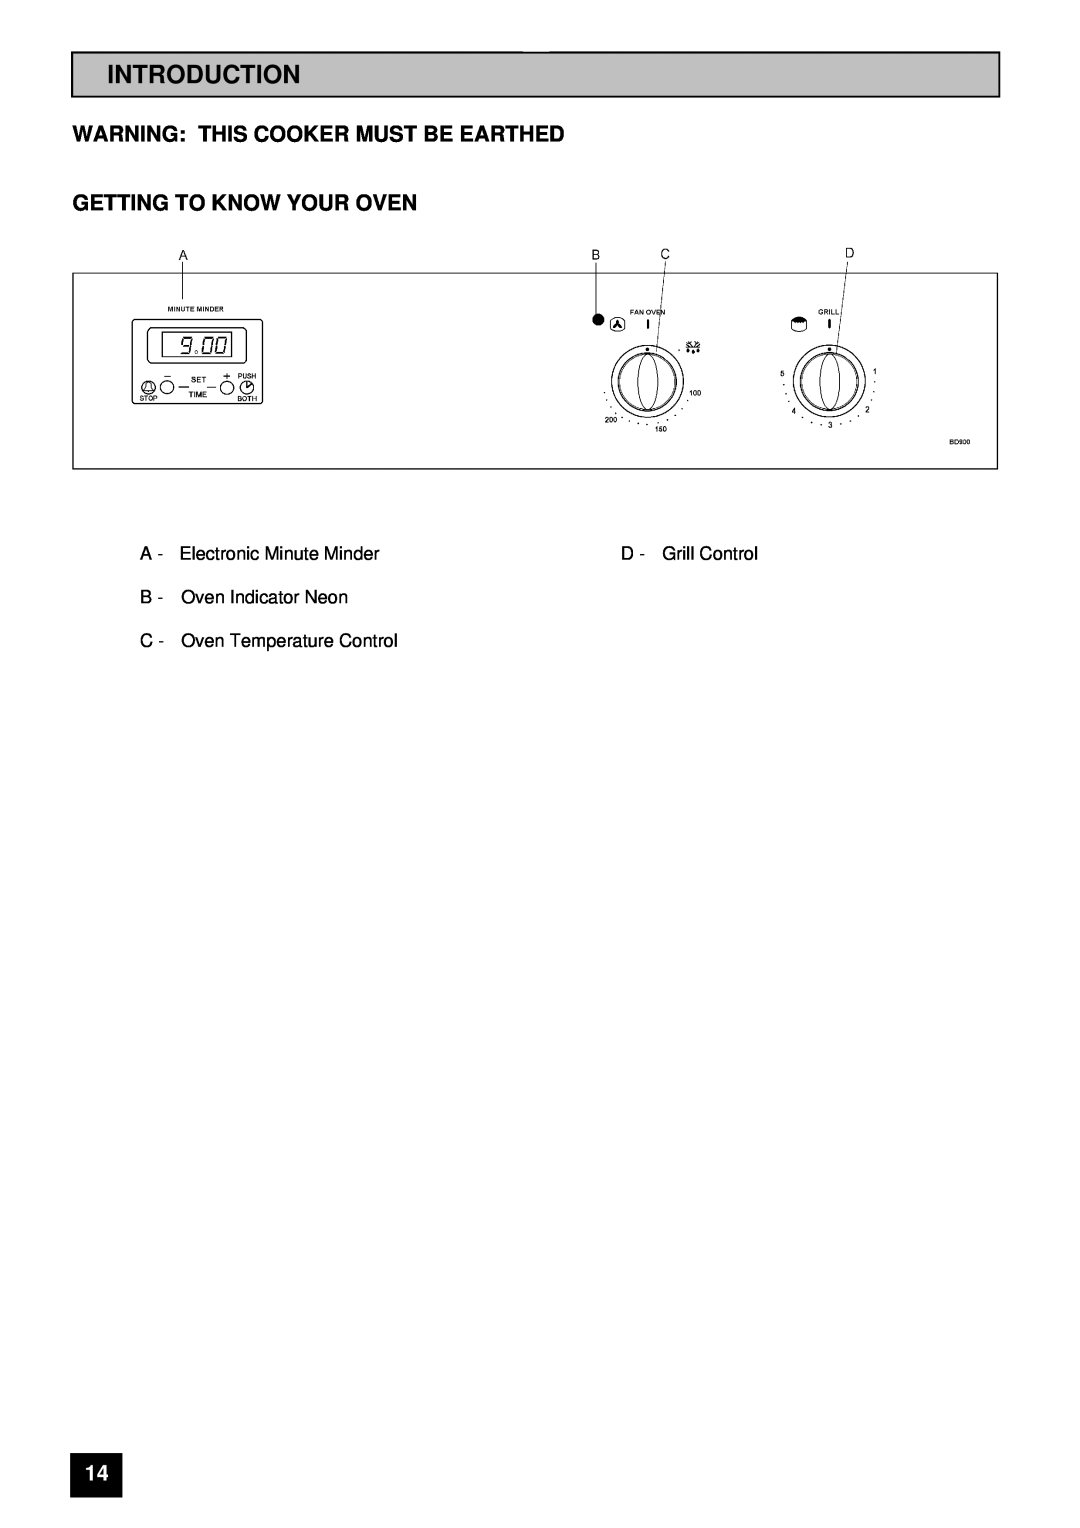 Tricity Bendix BD900 installation instructions Introduction, Warning This Cooker Must Be Earthed, Getting To Know Your Oven 